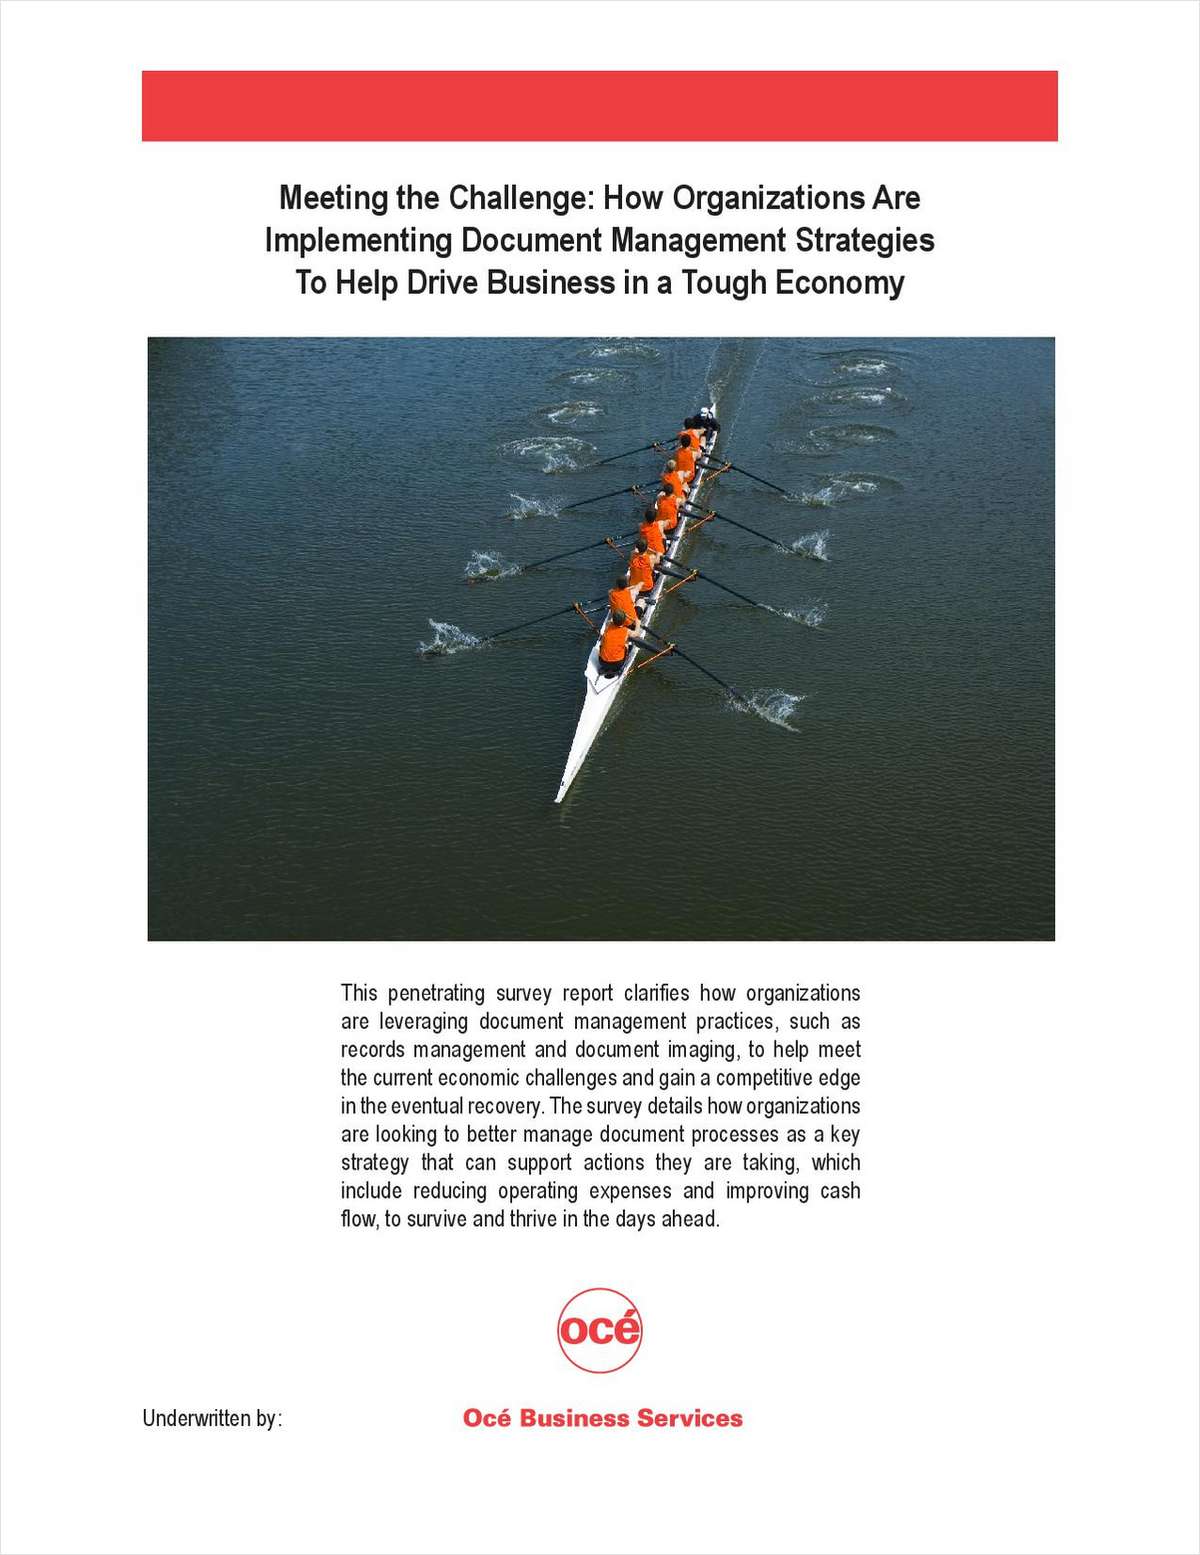 How Organizations are Implementing Document Management Strategies to Help Drive Business in a Tough Economy